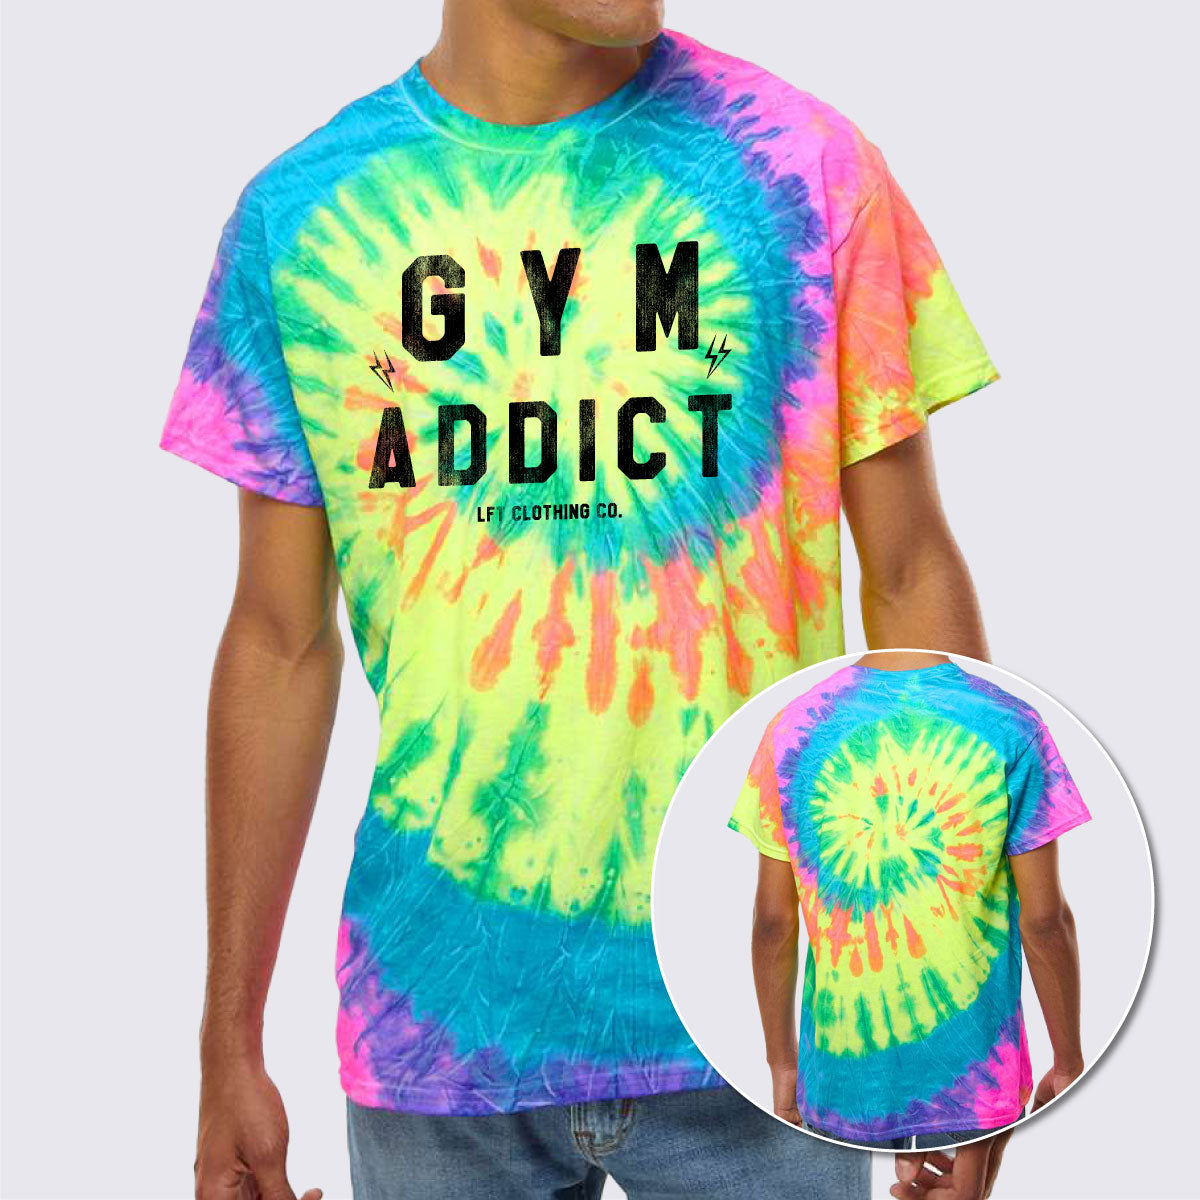 Addict Multi-Color Tie-Dyed T-Shirt - Clothing Company